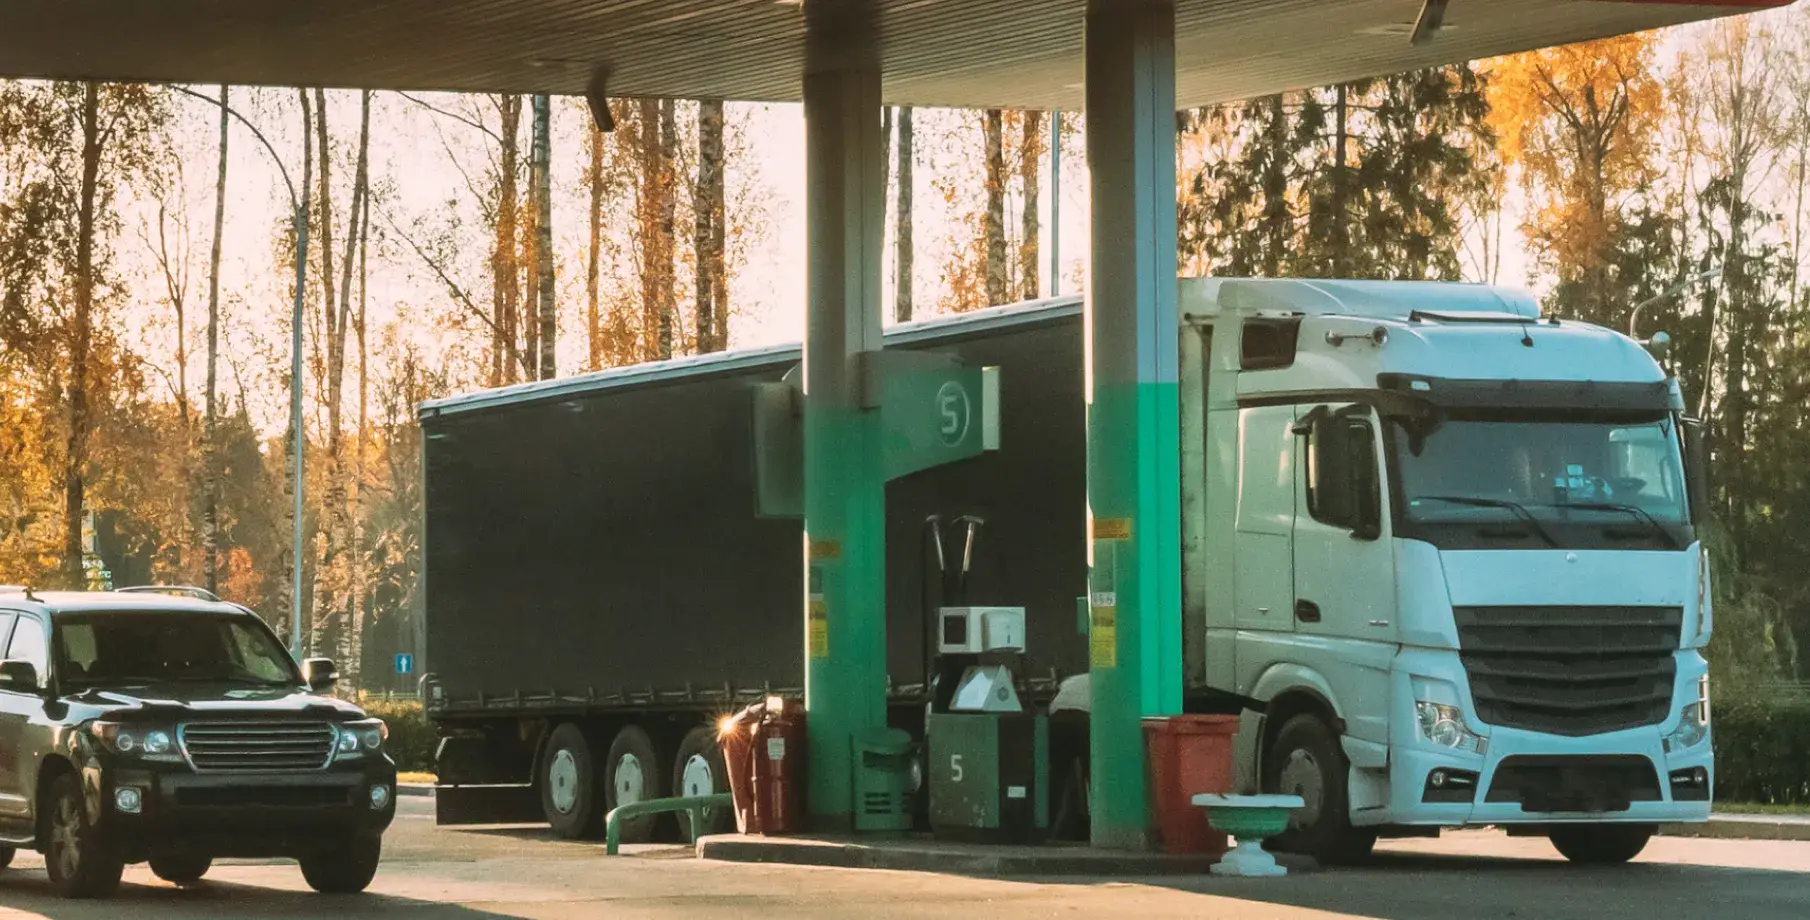 Large truck fueling up at a petrol station.